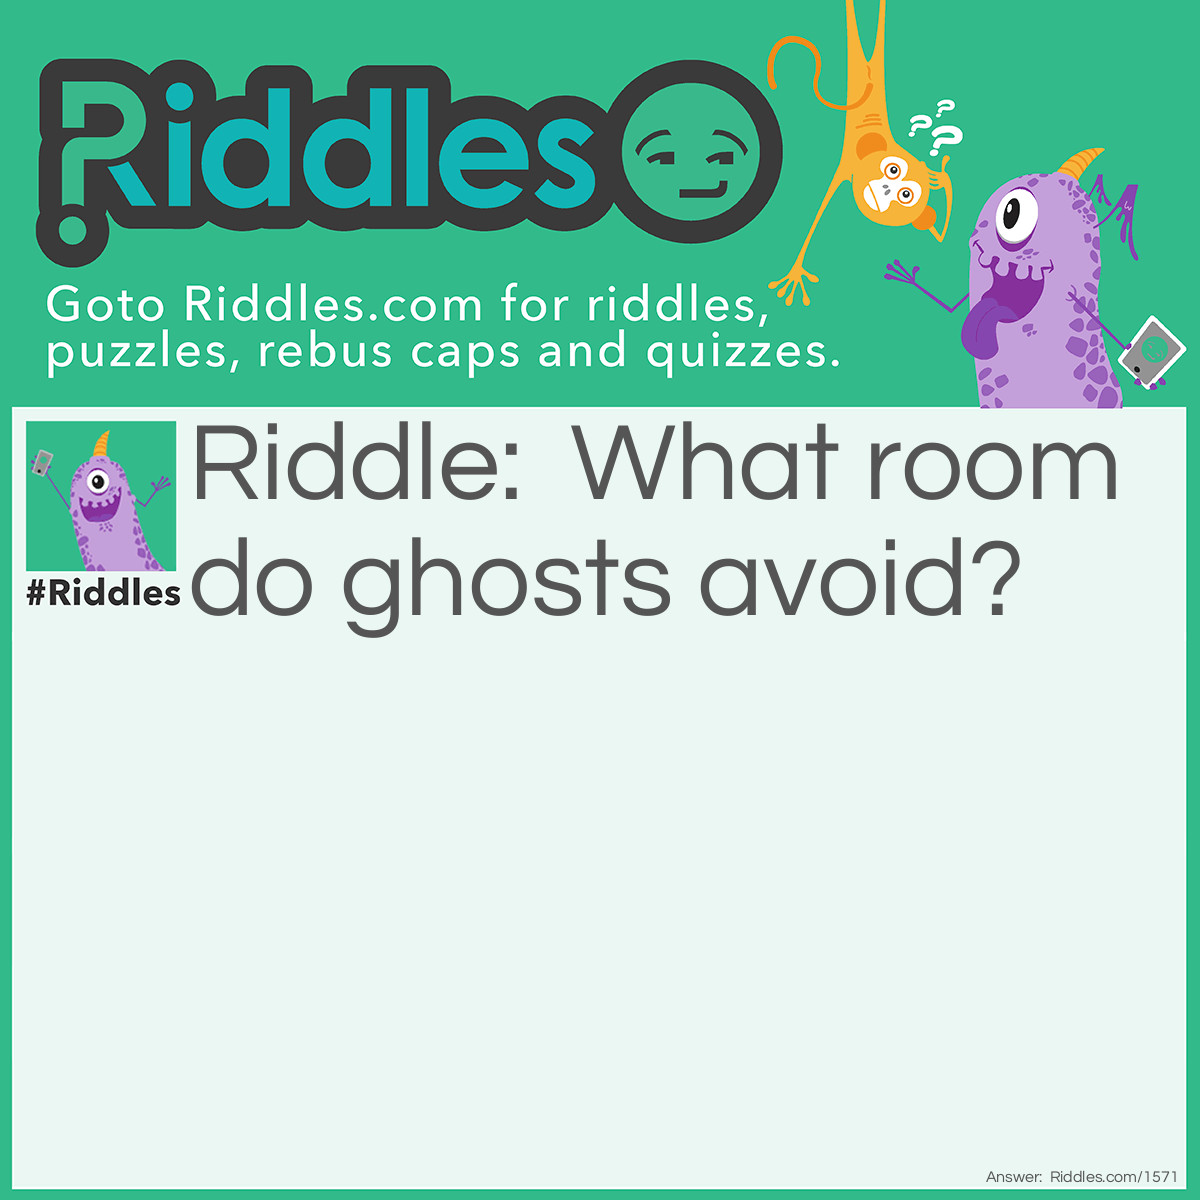 Riddle: What room do <a href="https://www.riddles.com/post/44/ghost-riddles">ghosts</a> avoid? Answer: The living room.